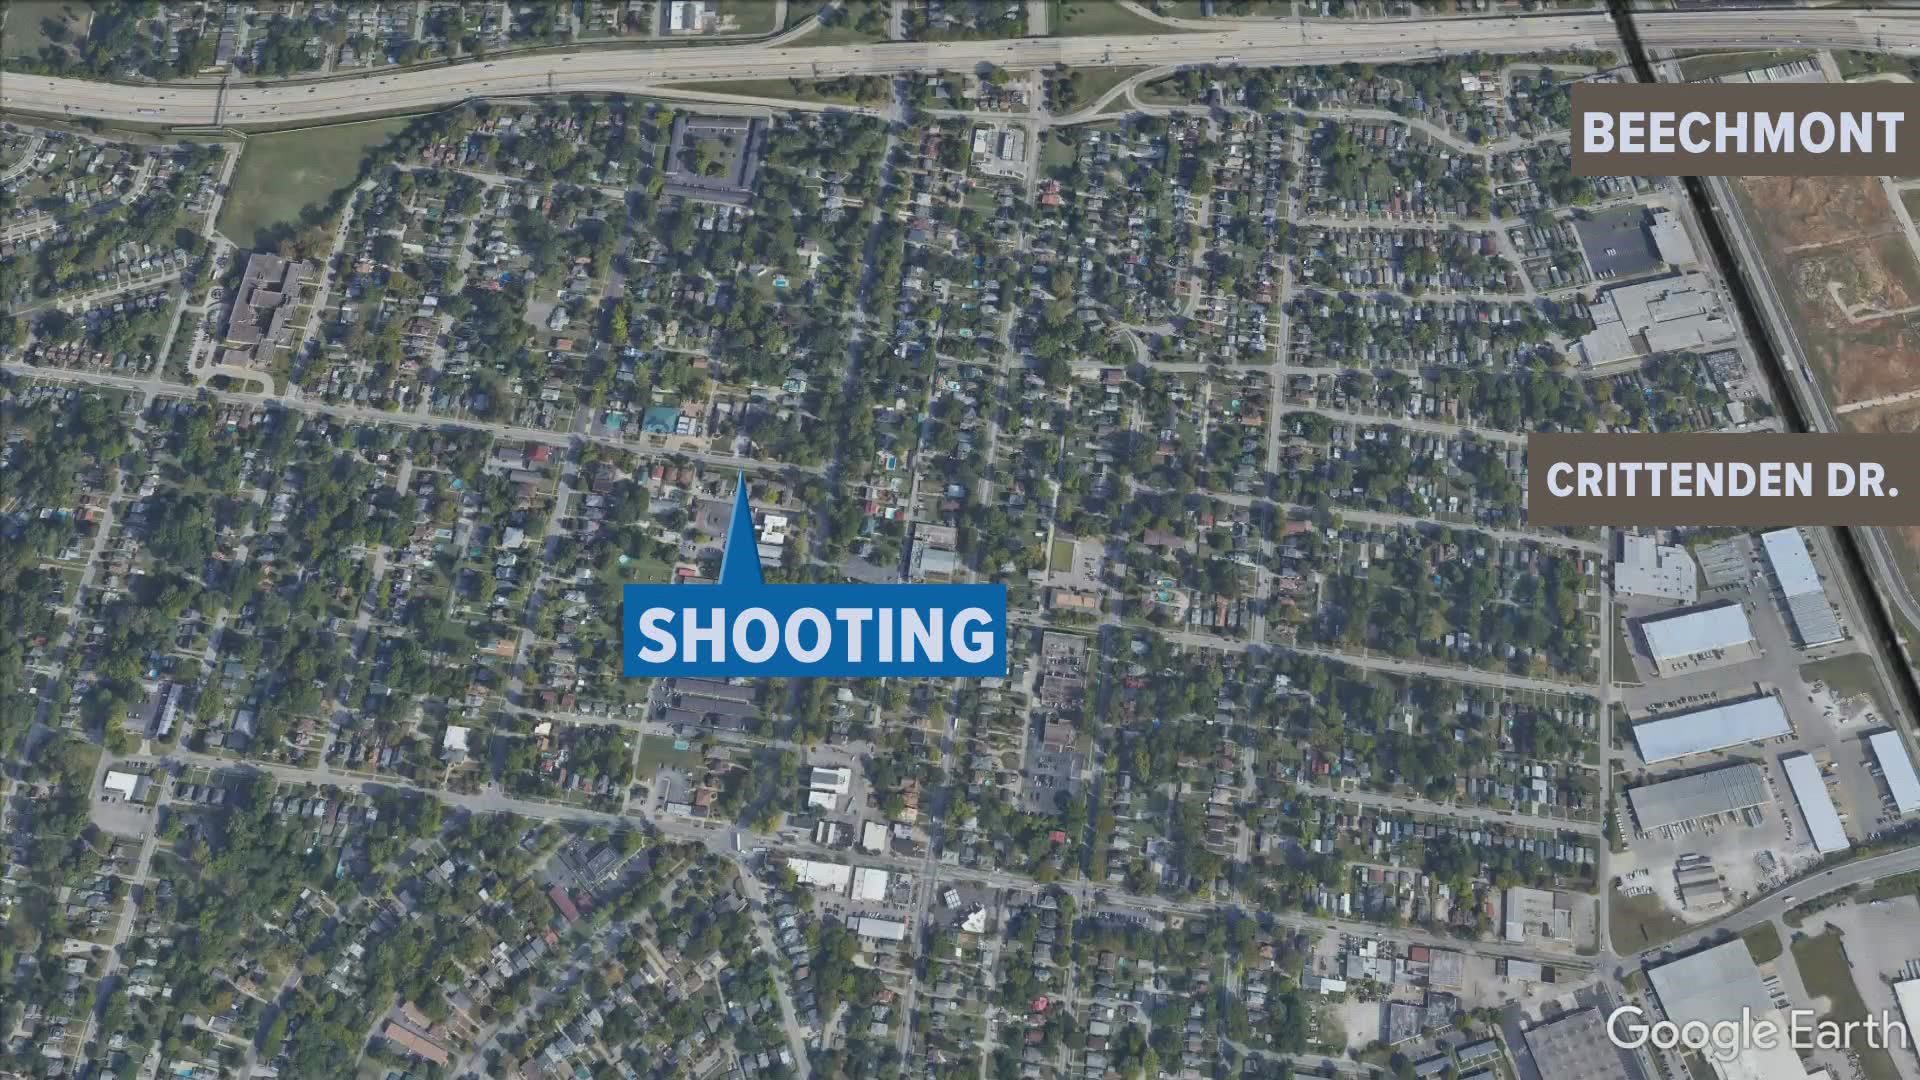 At 3 a.m. Thursday morning, LMPD says they found an adult male with a fatal gunshot wound, pronounced dead at the scene.